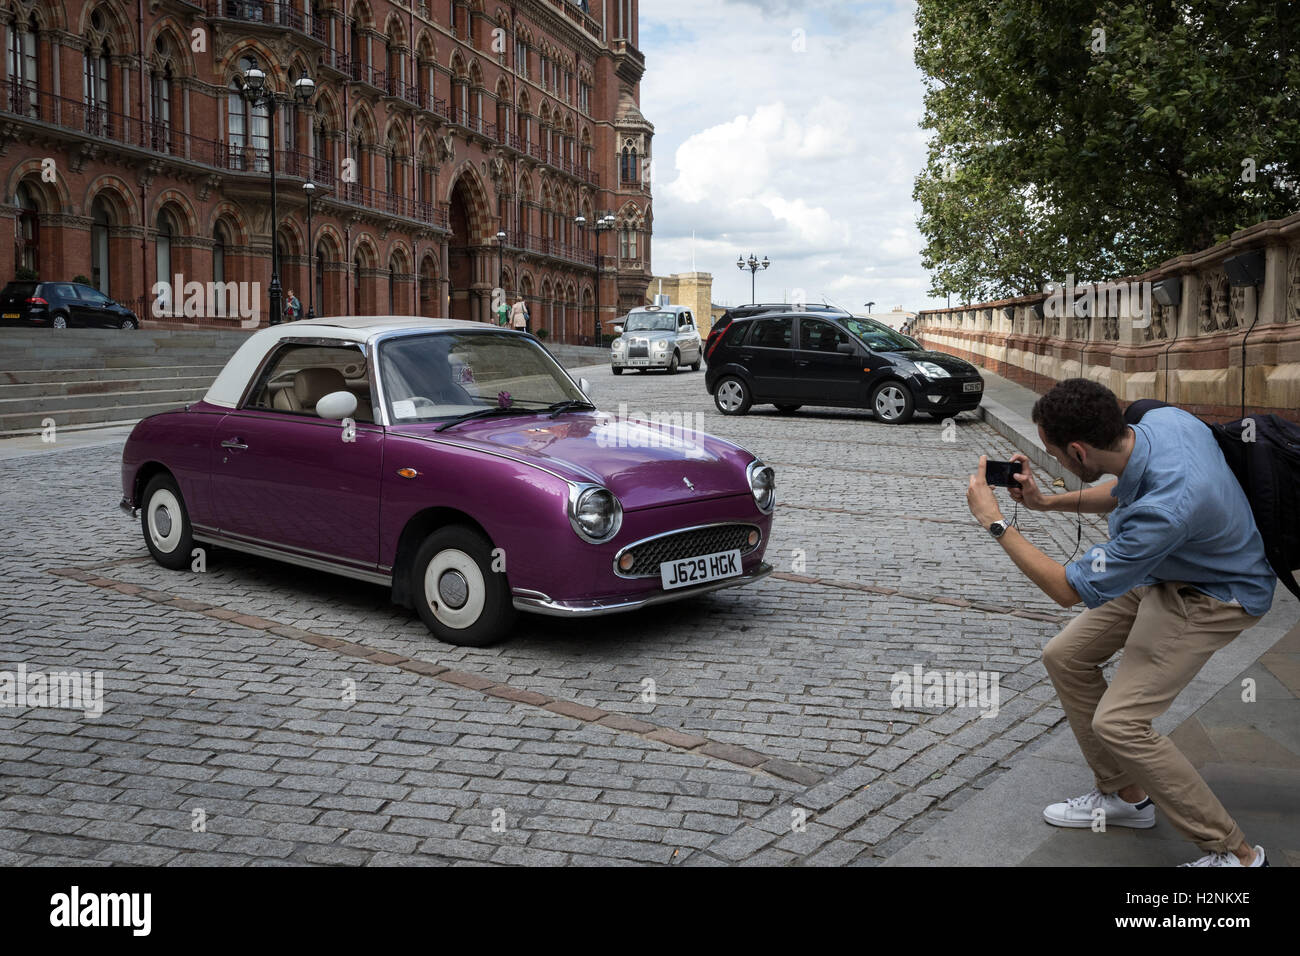 A passer-by takes a photograph of a Nissan Figaro car parked at St Pancras railway station and hotel in north London Stock Photo